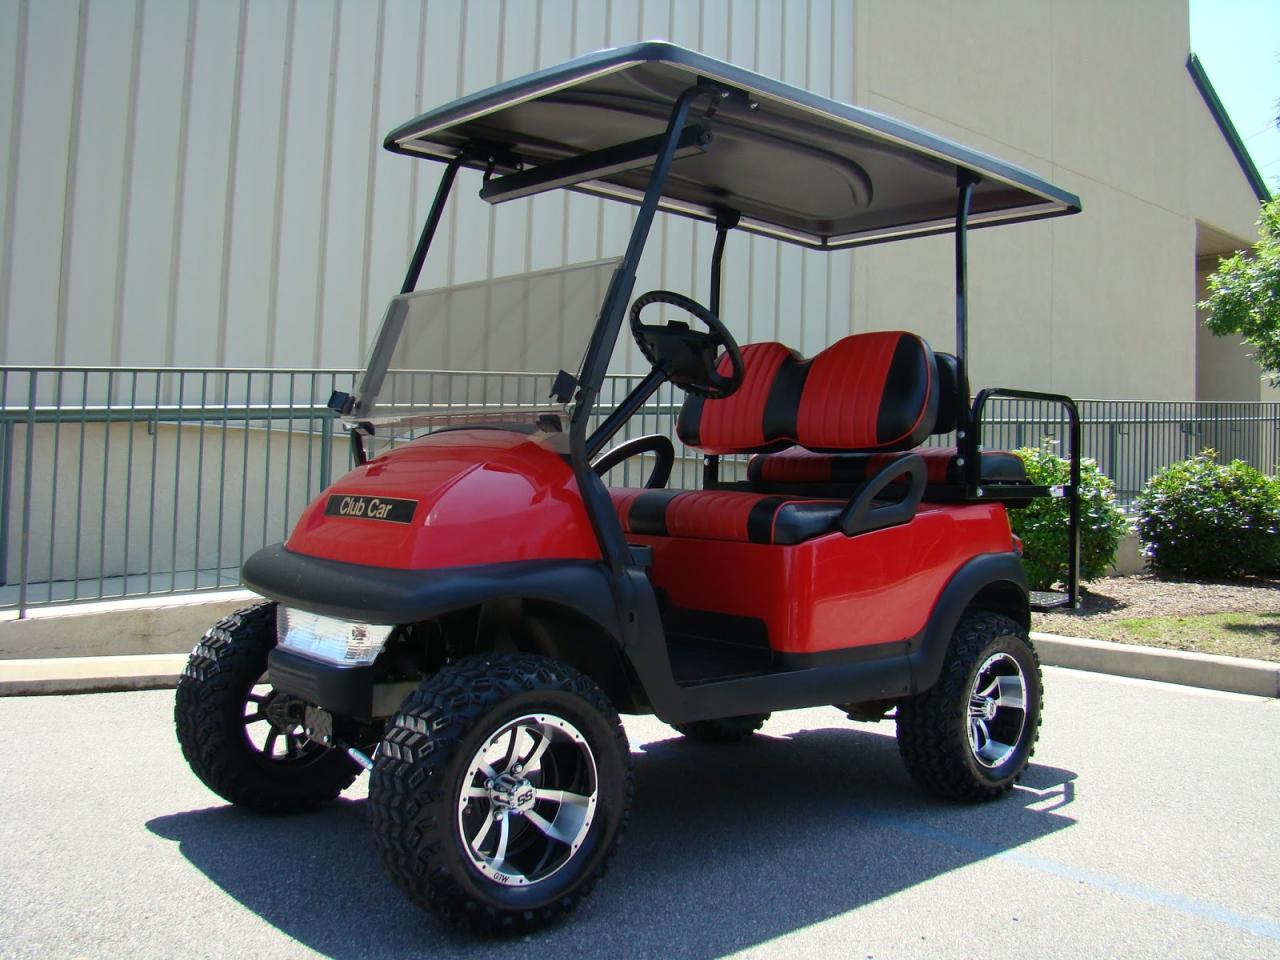 Find Your Perfect Ride: Used Golf Carts for Sale by Owner in Caldwell, North Carolina